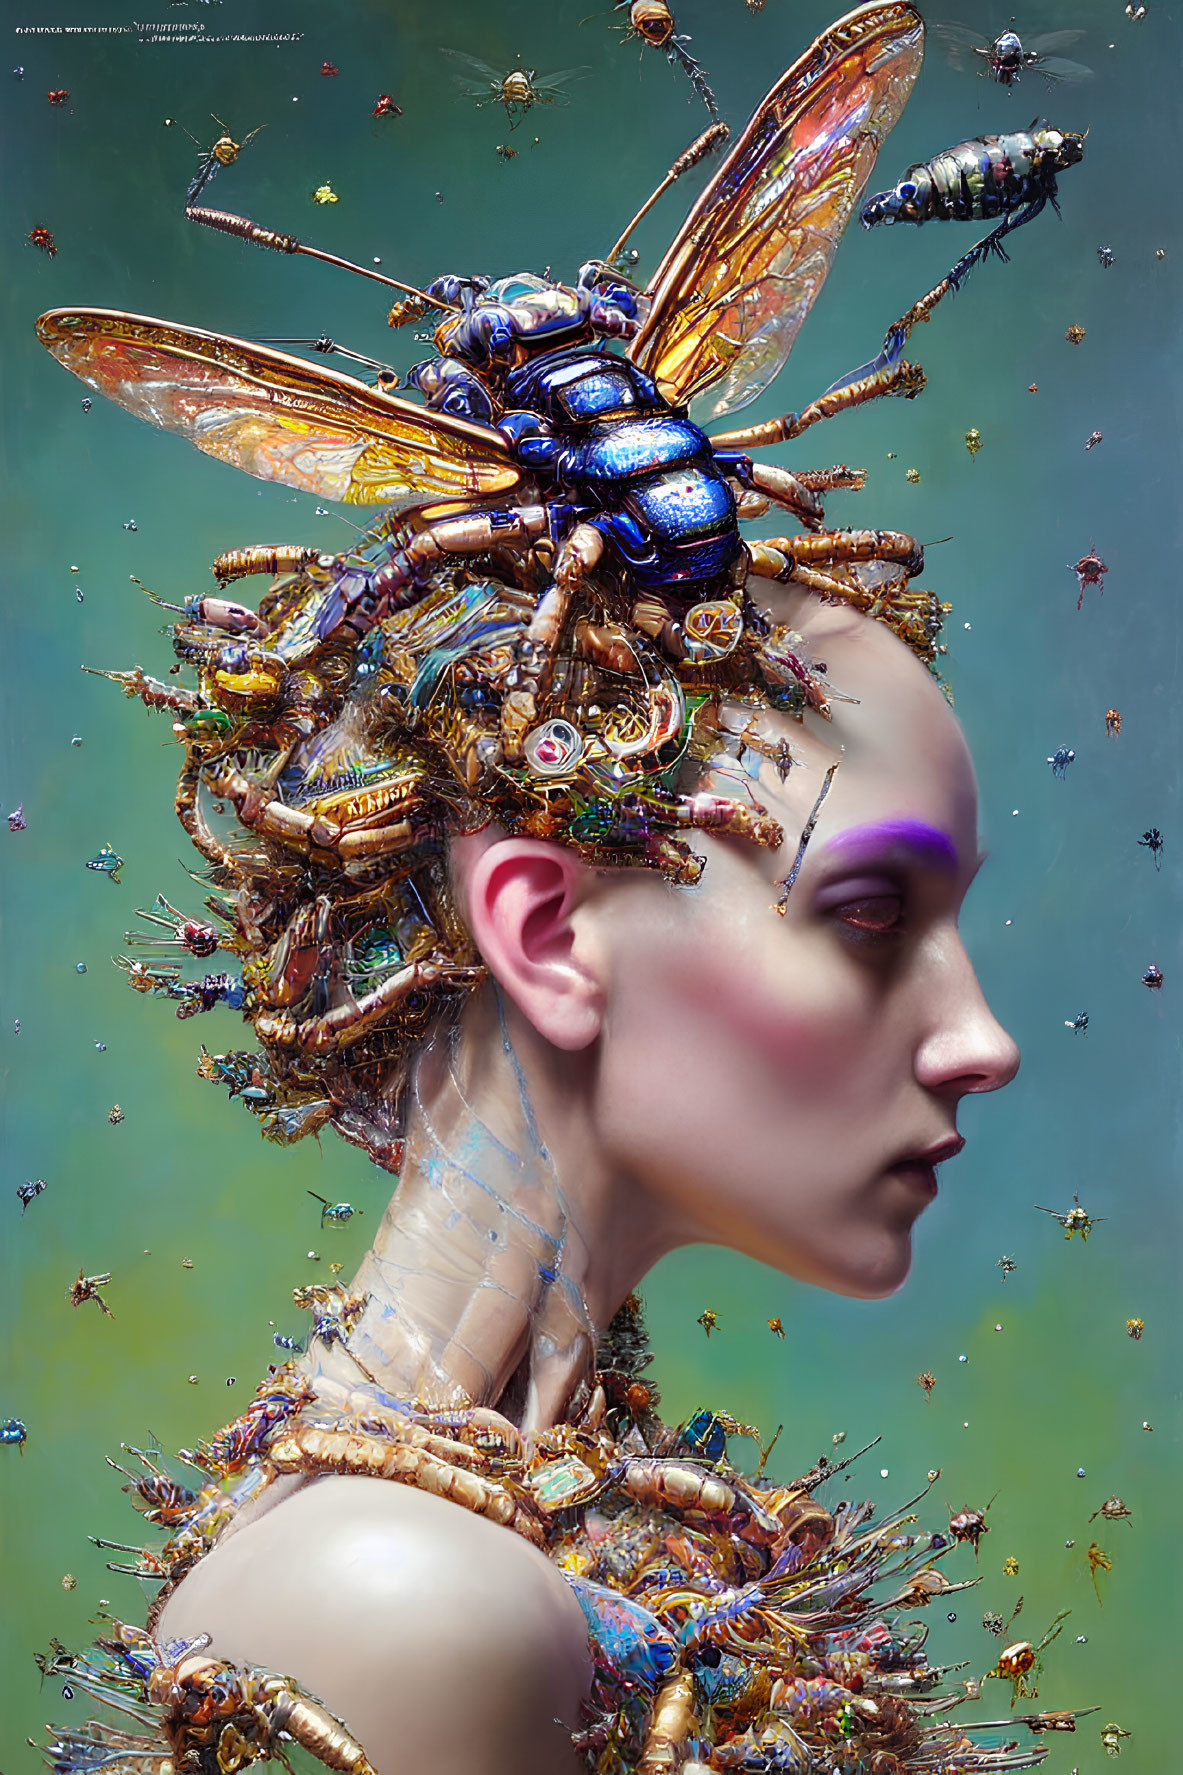 Intricate surreal portrait with mechanical insect headpiece and blue metallic bee